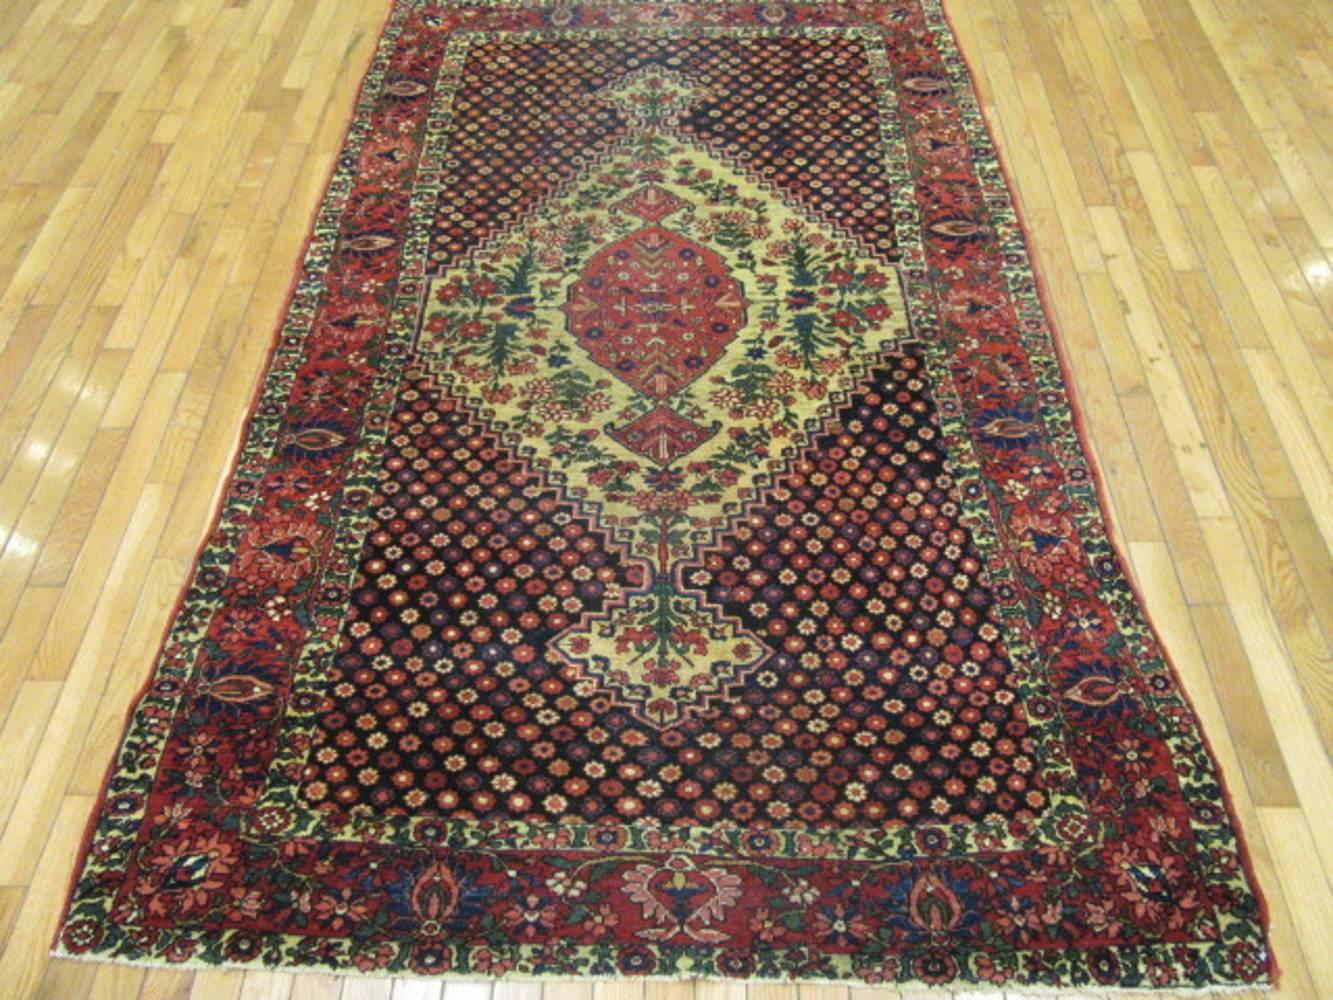 This is a finely hand-knotted antique Persian rug from the Baktiary region of the western mountains in Iran. The rug though nomadic has an intricate pattern with a large central medallion in ivory on a dark navy color background. It is made with